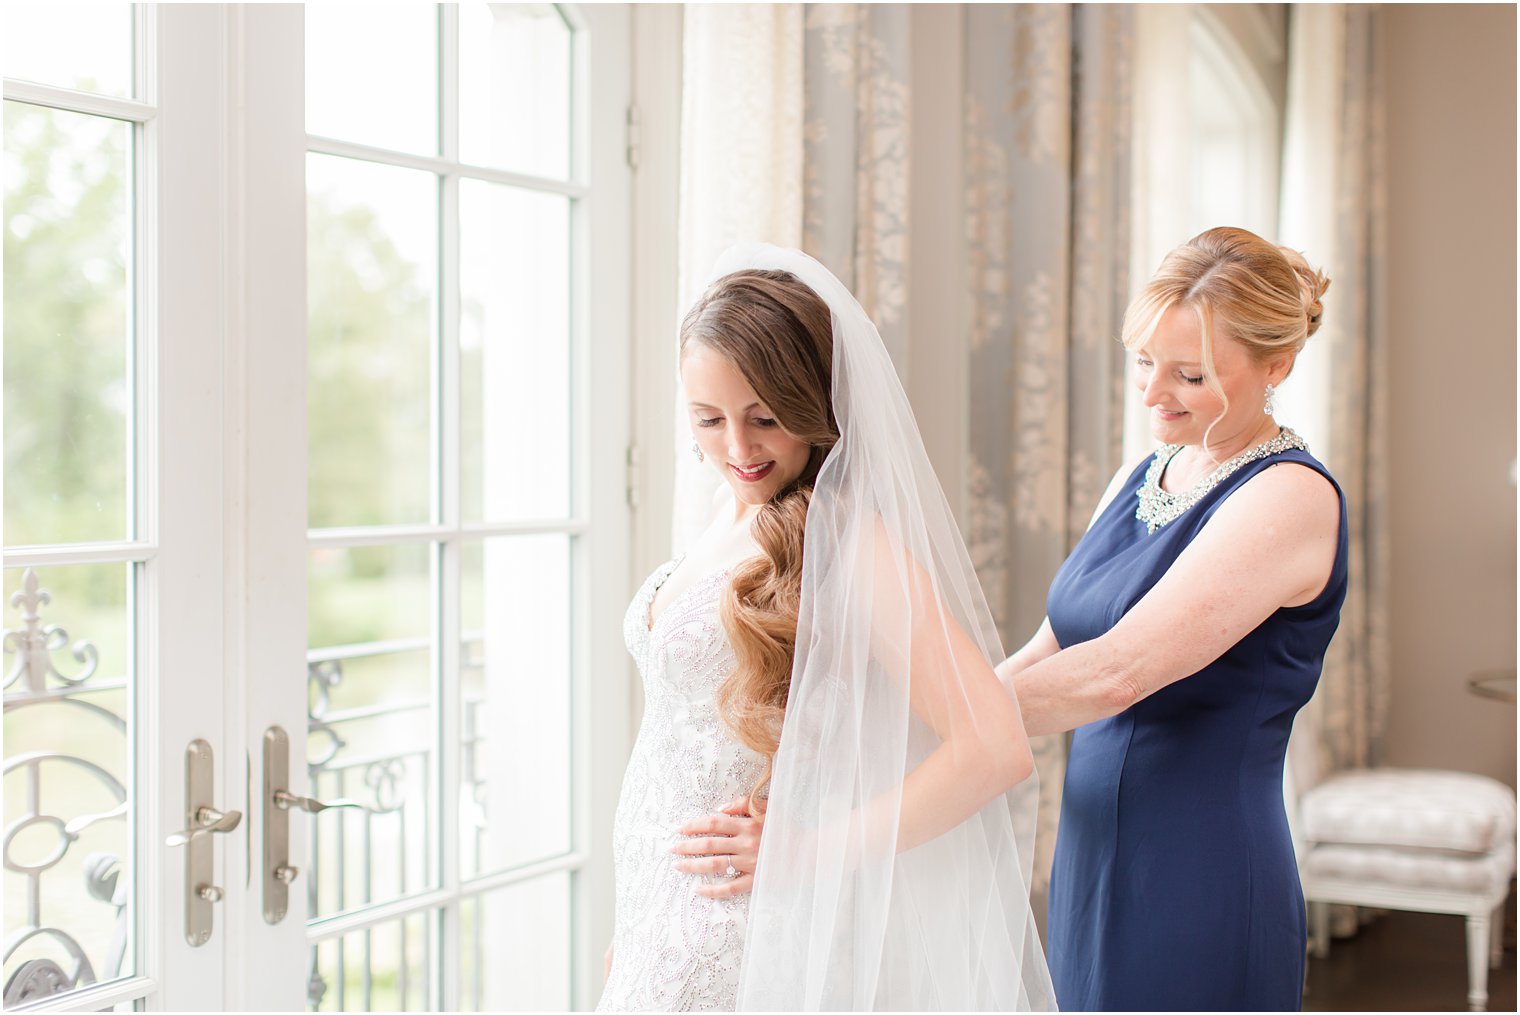 mom helps bride with veil on wedding day